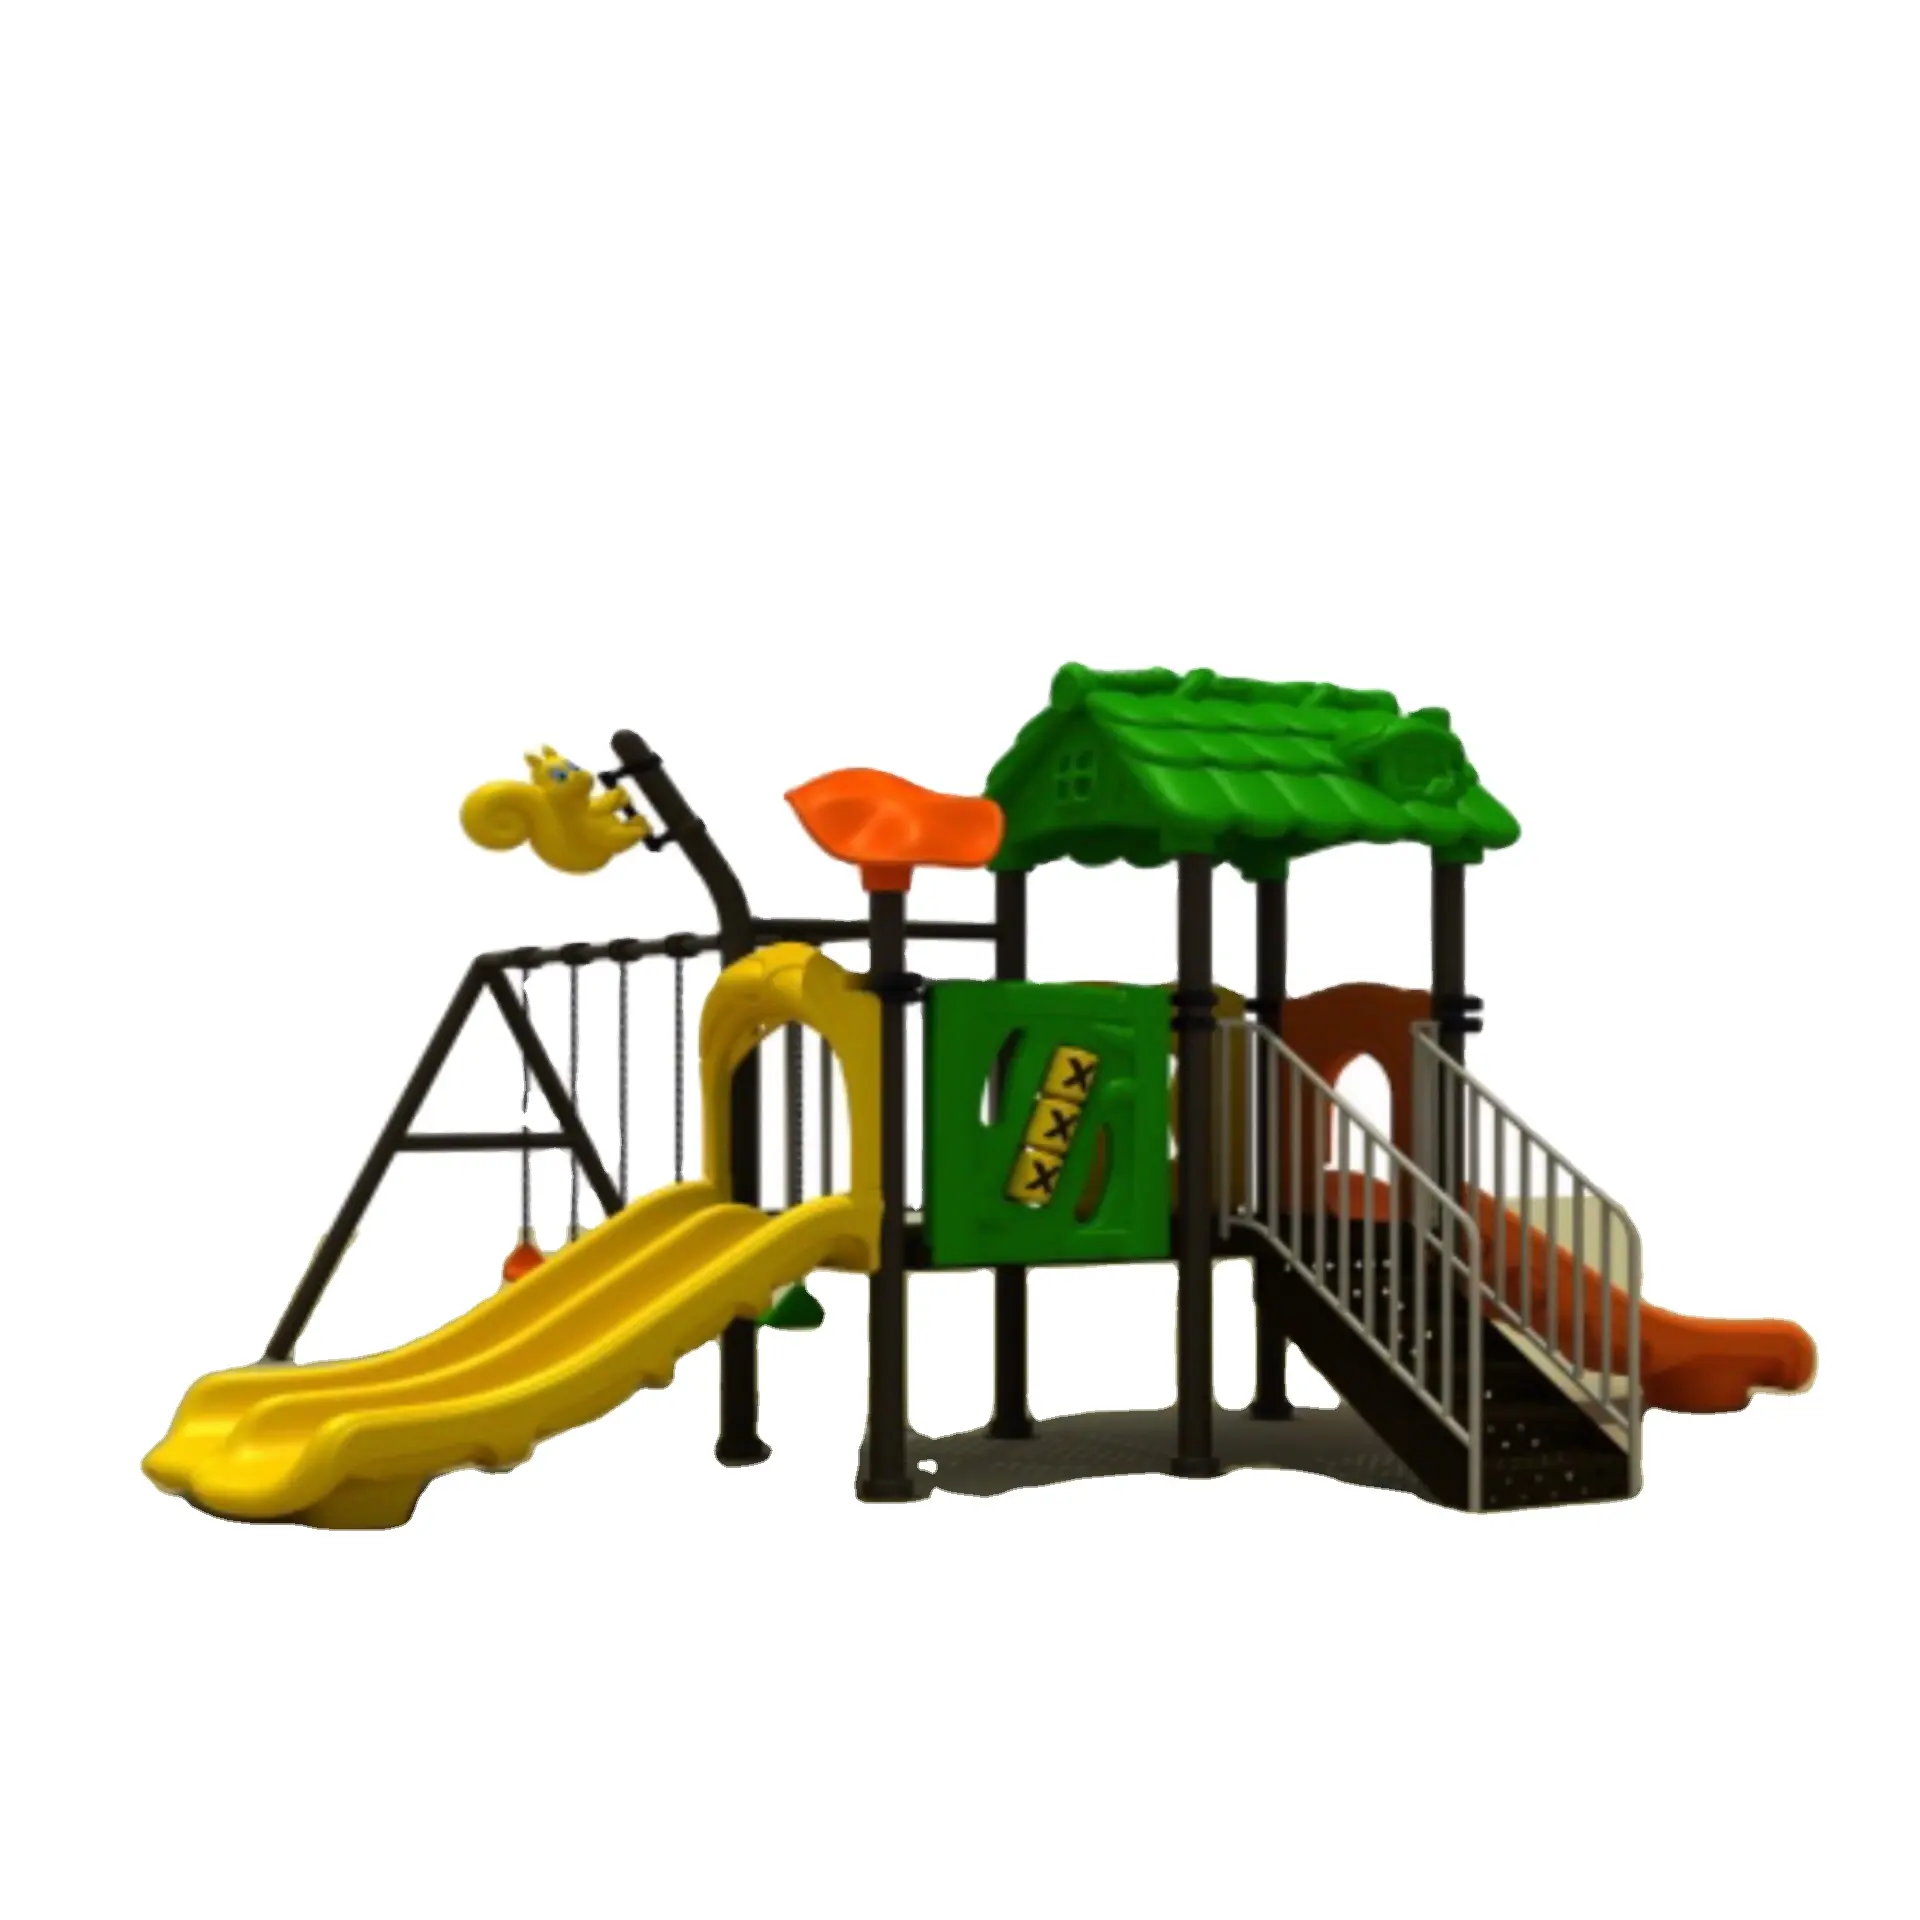 Outdoor Playground with Swing Outdoor Slide Equipment Children's Slide Kid Outdoor Playground Outdoor Swing Playground